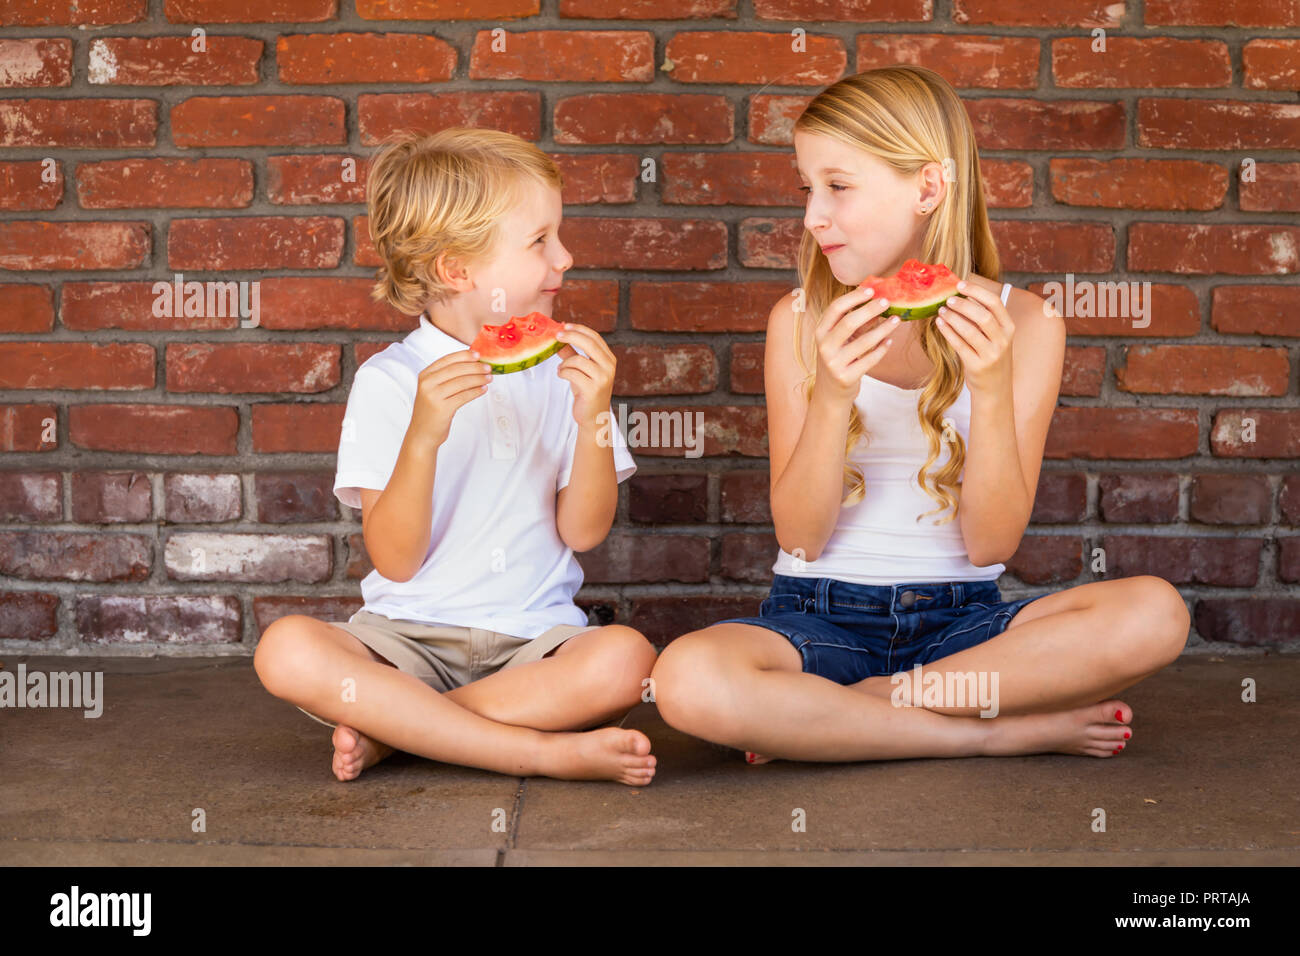 Cute Young Cuacasian Boy and Girl Eating Watermelon Against Brick Wall. Stock Photo